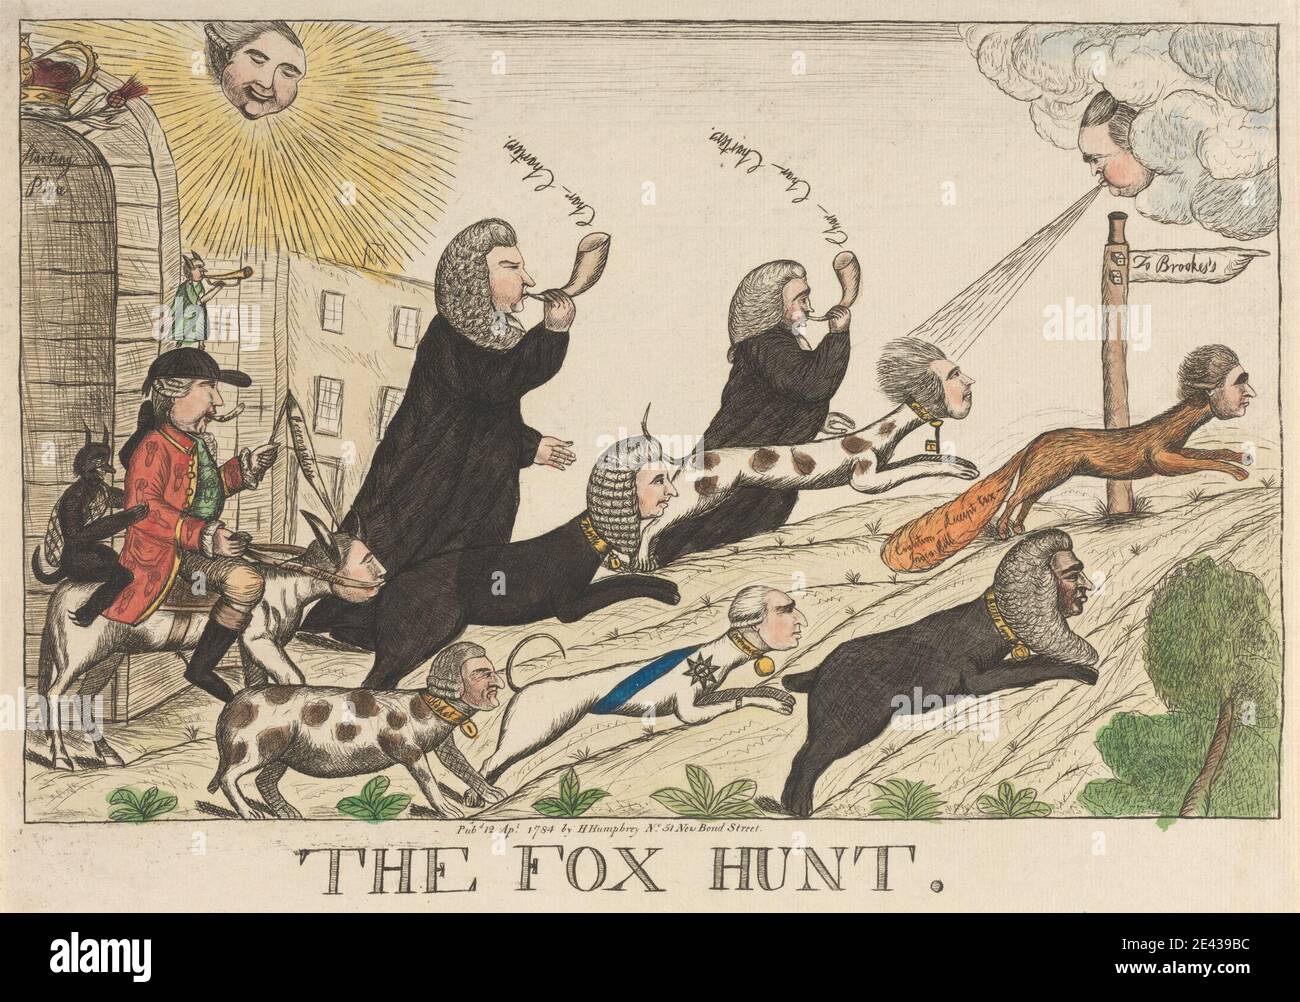 William Dent, active 1784â€“1793, The Fox Hunt, 1784. Etching with watercolor on laid paper. Stock Photo